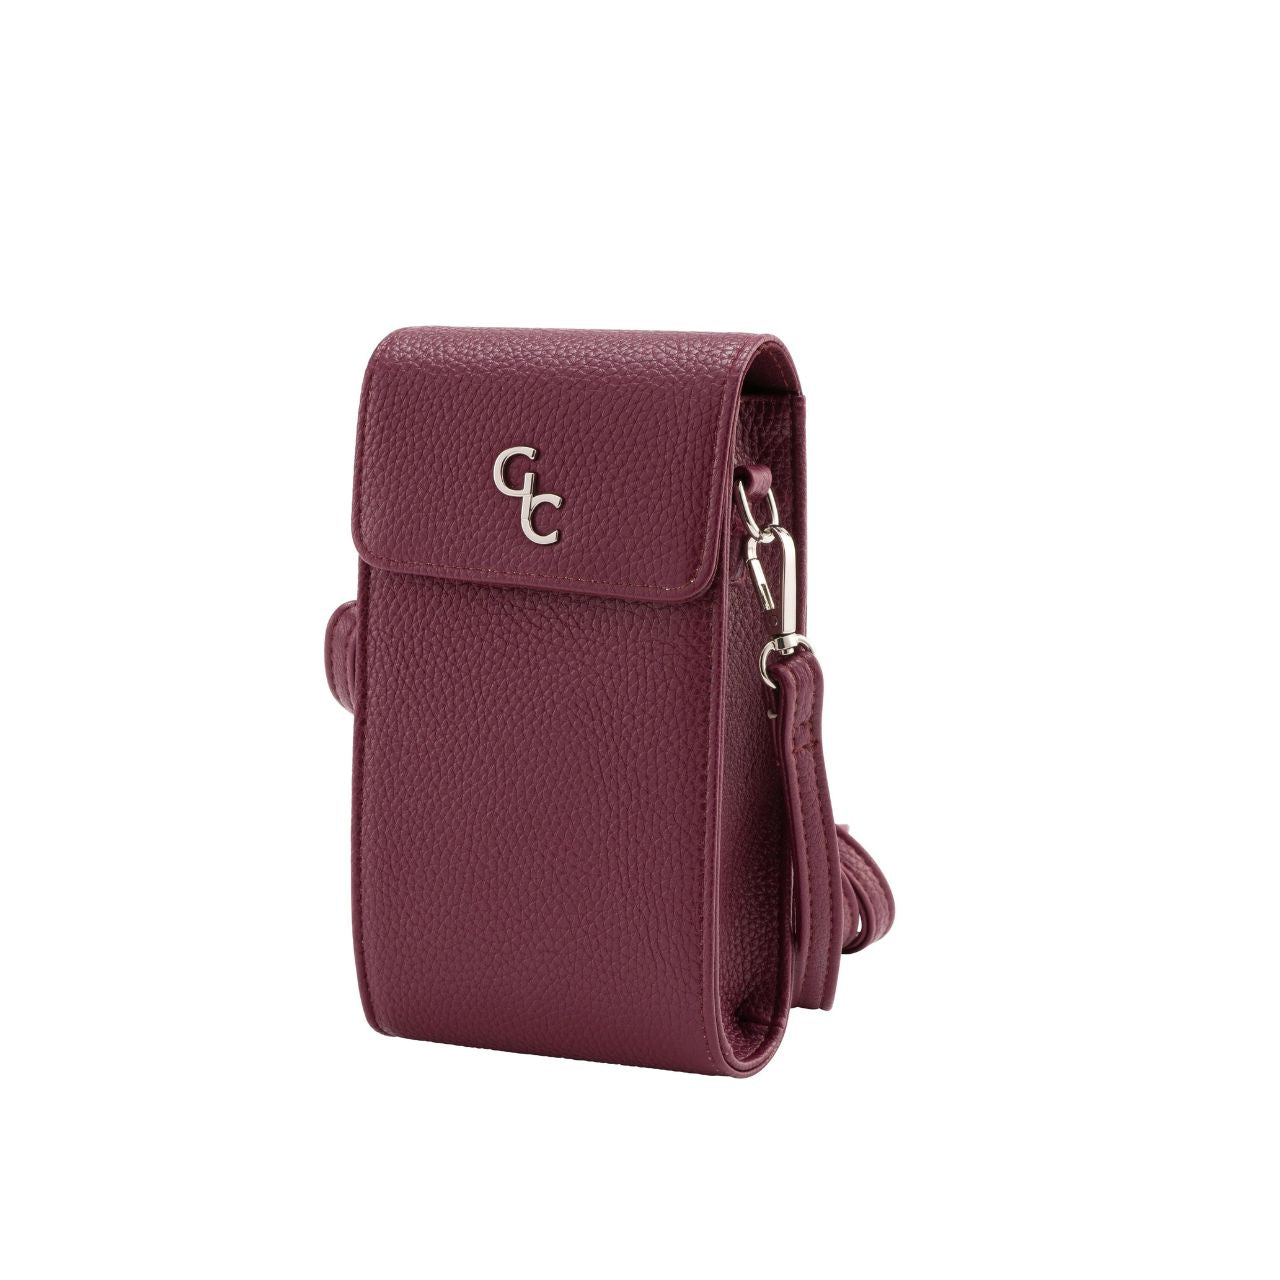 Mini Cross Body Bag - Mulberry by Galway Crystal  Introducing the new must have accessory that is truly functional. Our Light weight, Slim, Sleek, Crossbody bag is designed to hold the most essential accessory: Your mobile phone. There is nothing more liberating than carrying a lightweight bag that carries your essentials